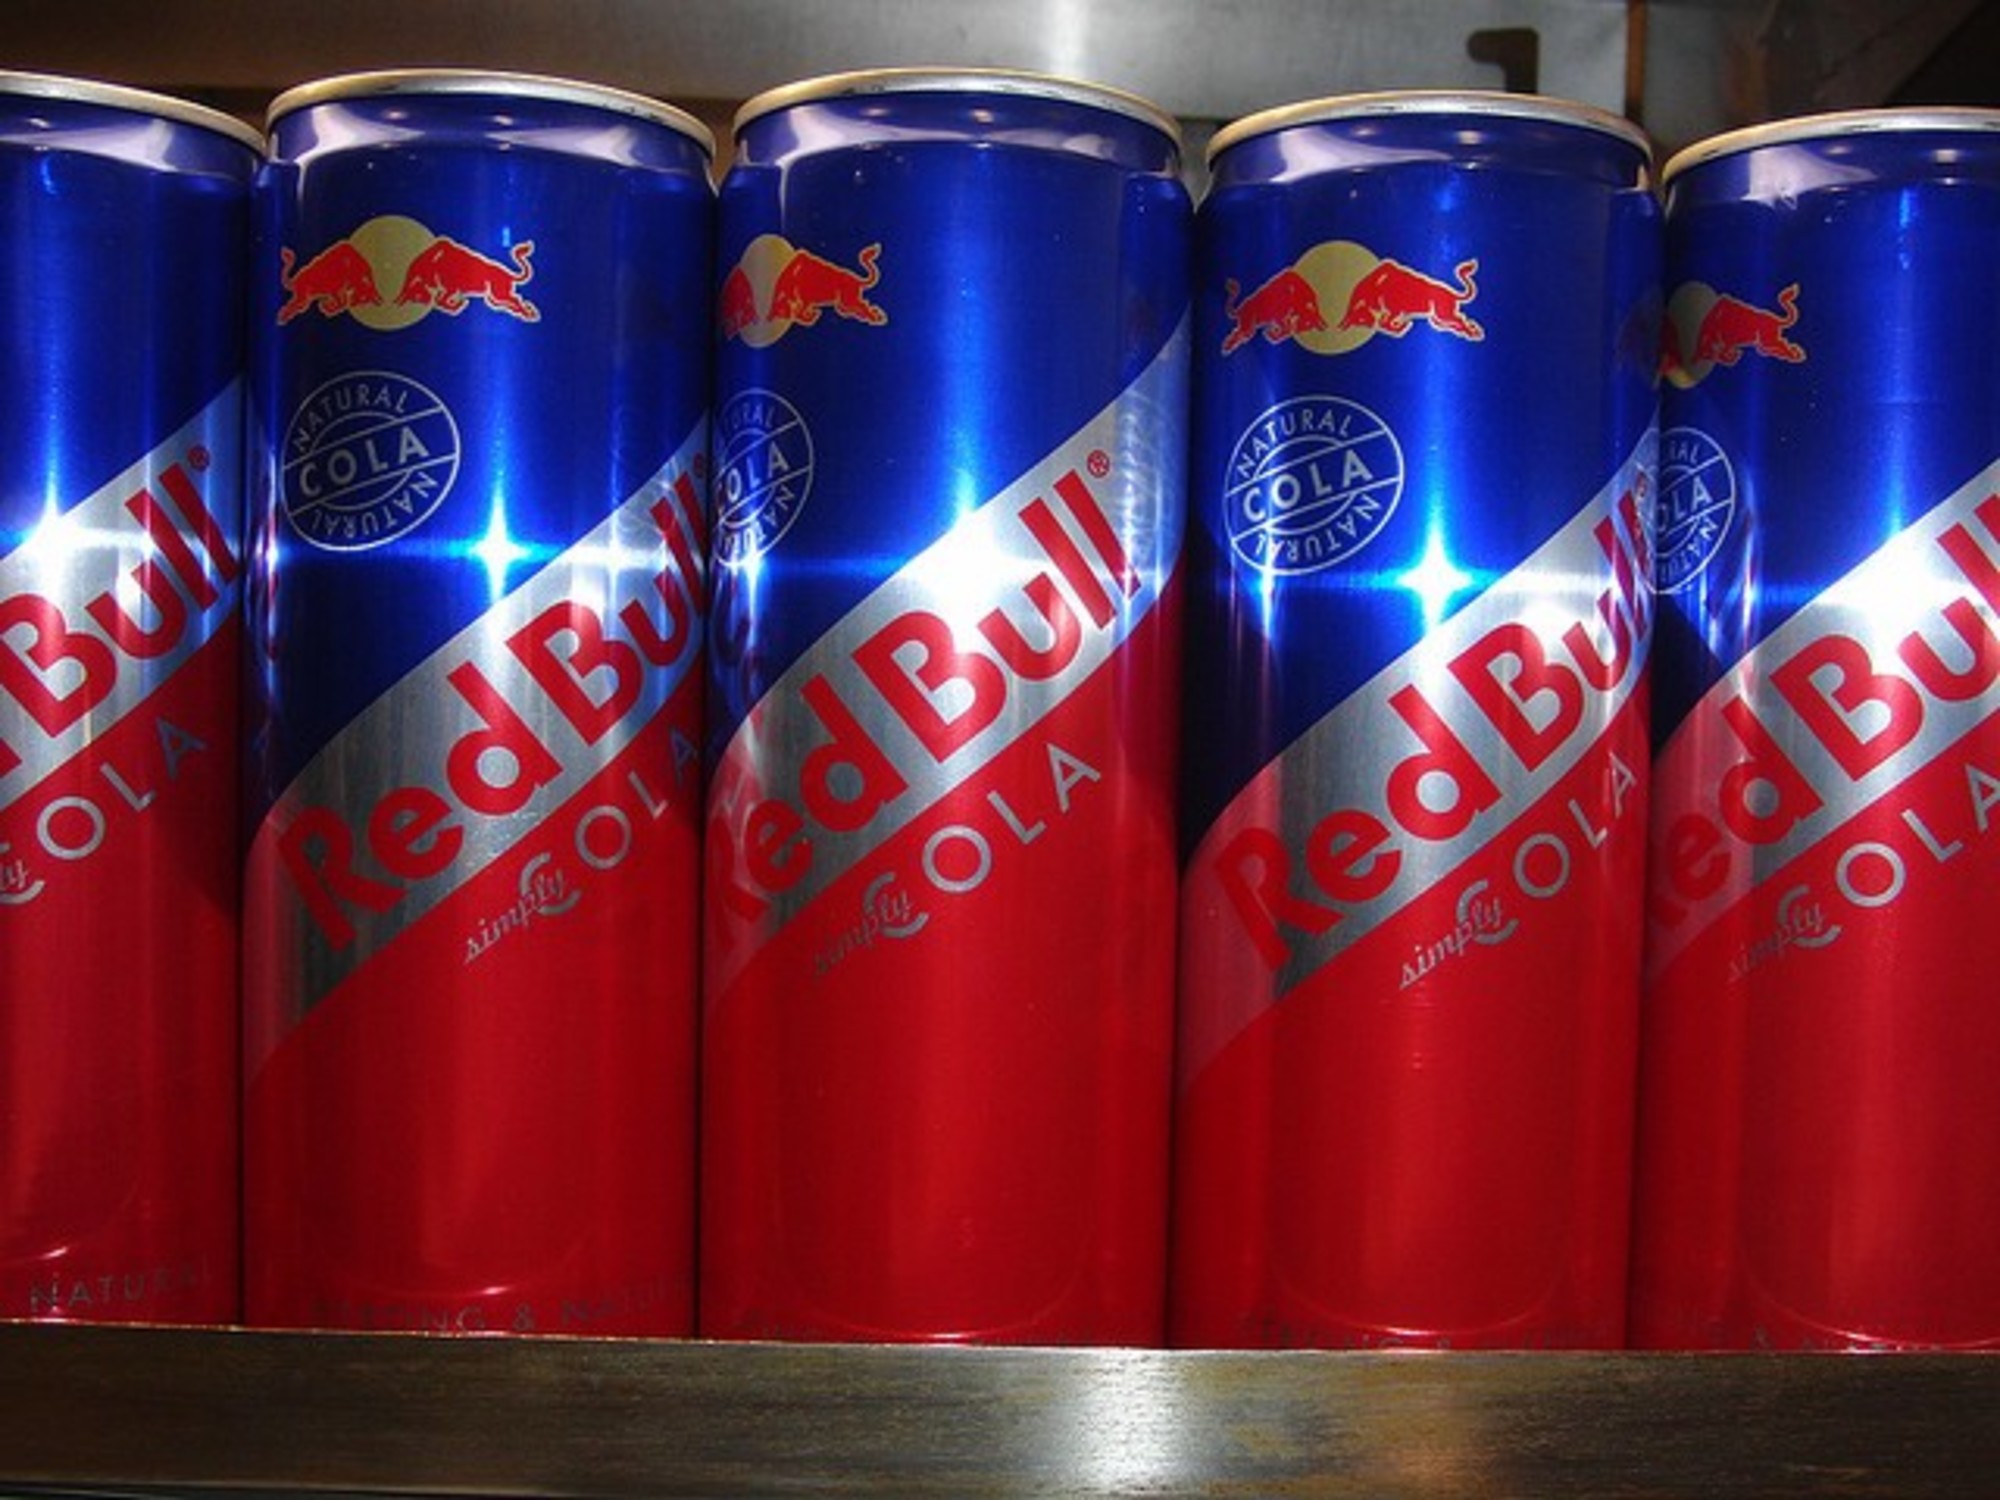 Original Red Bull Energy Drink From Austria - ATWAL AGRICULTURE PTY LTD ...